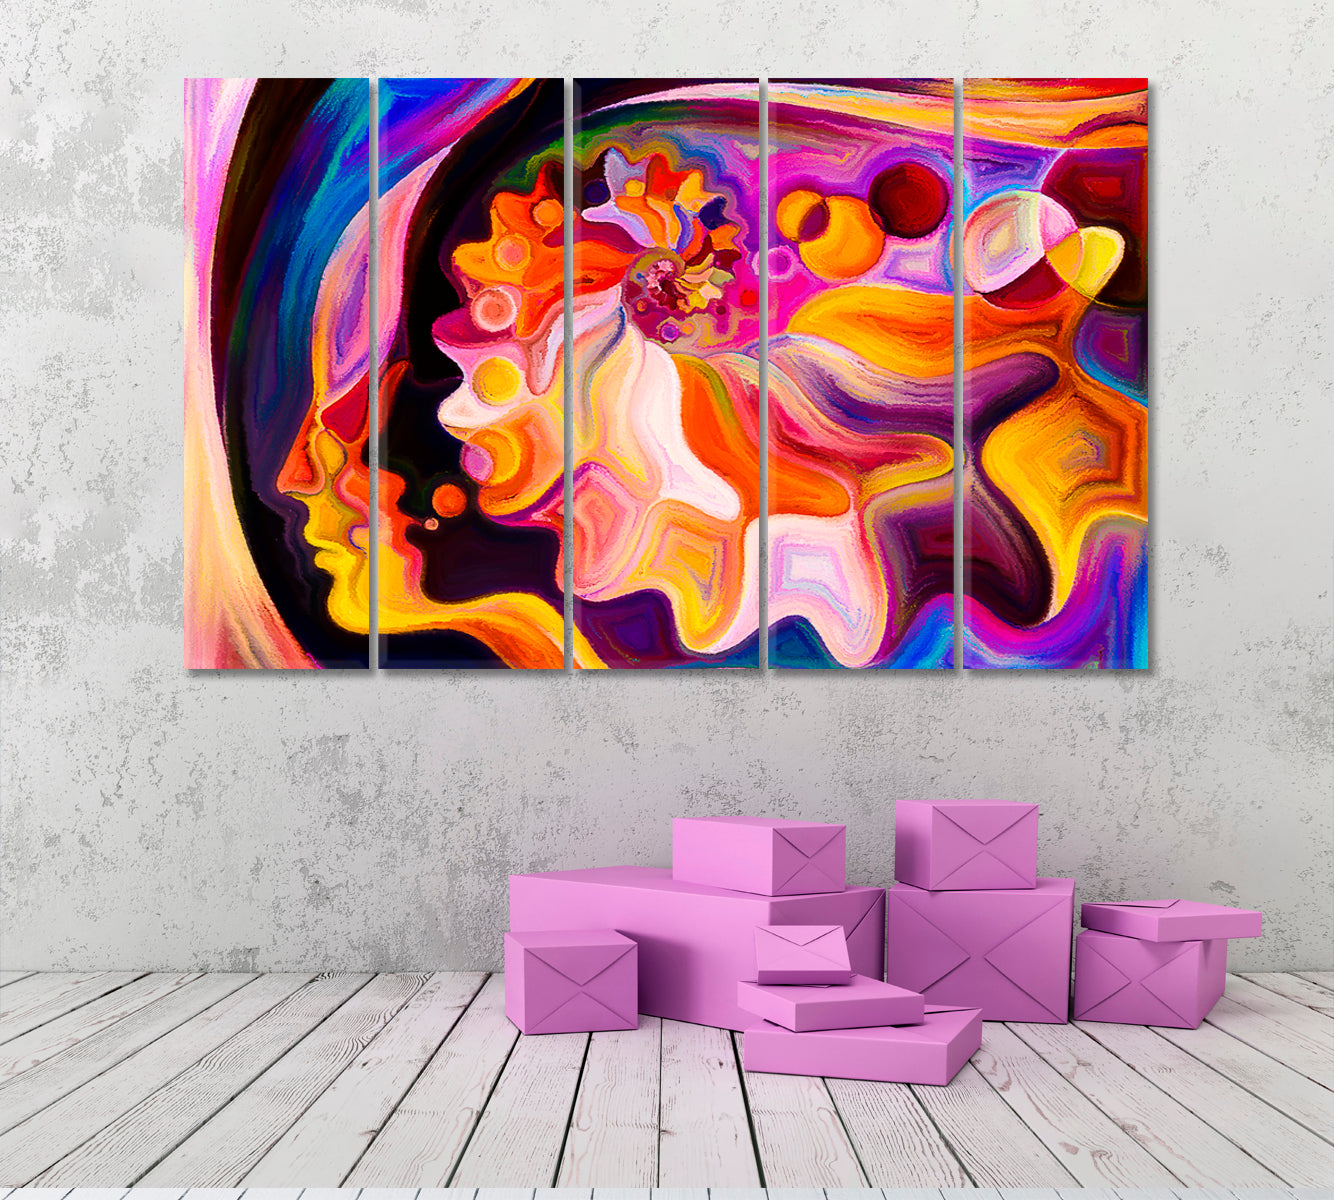 Life Forms Abstract Design Abstract Art Print Artesty 5 panels 36" x 24" 